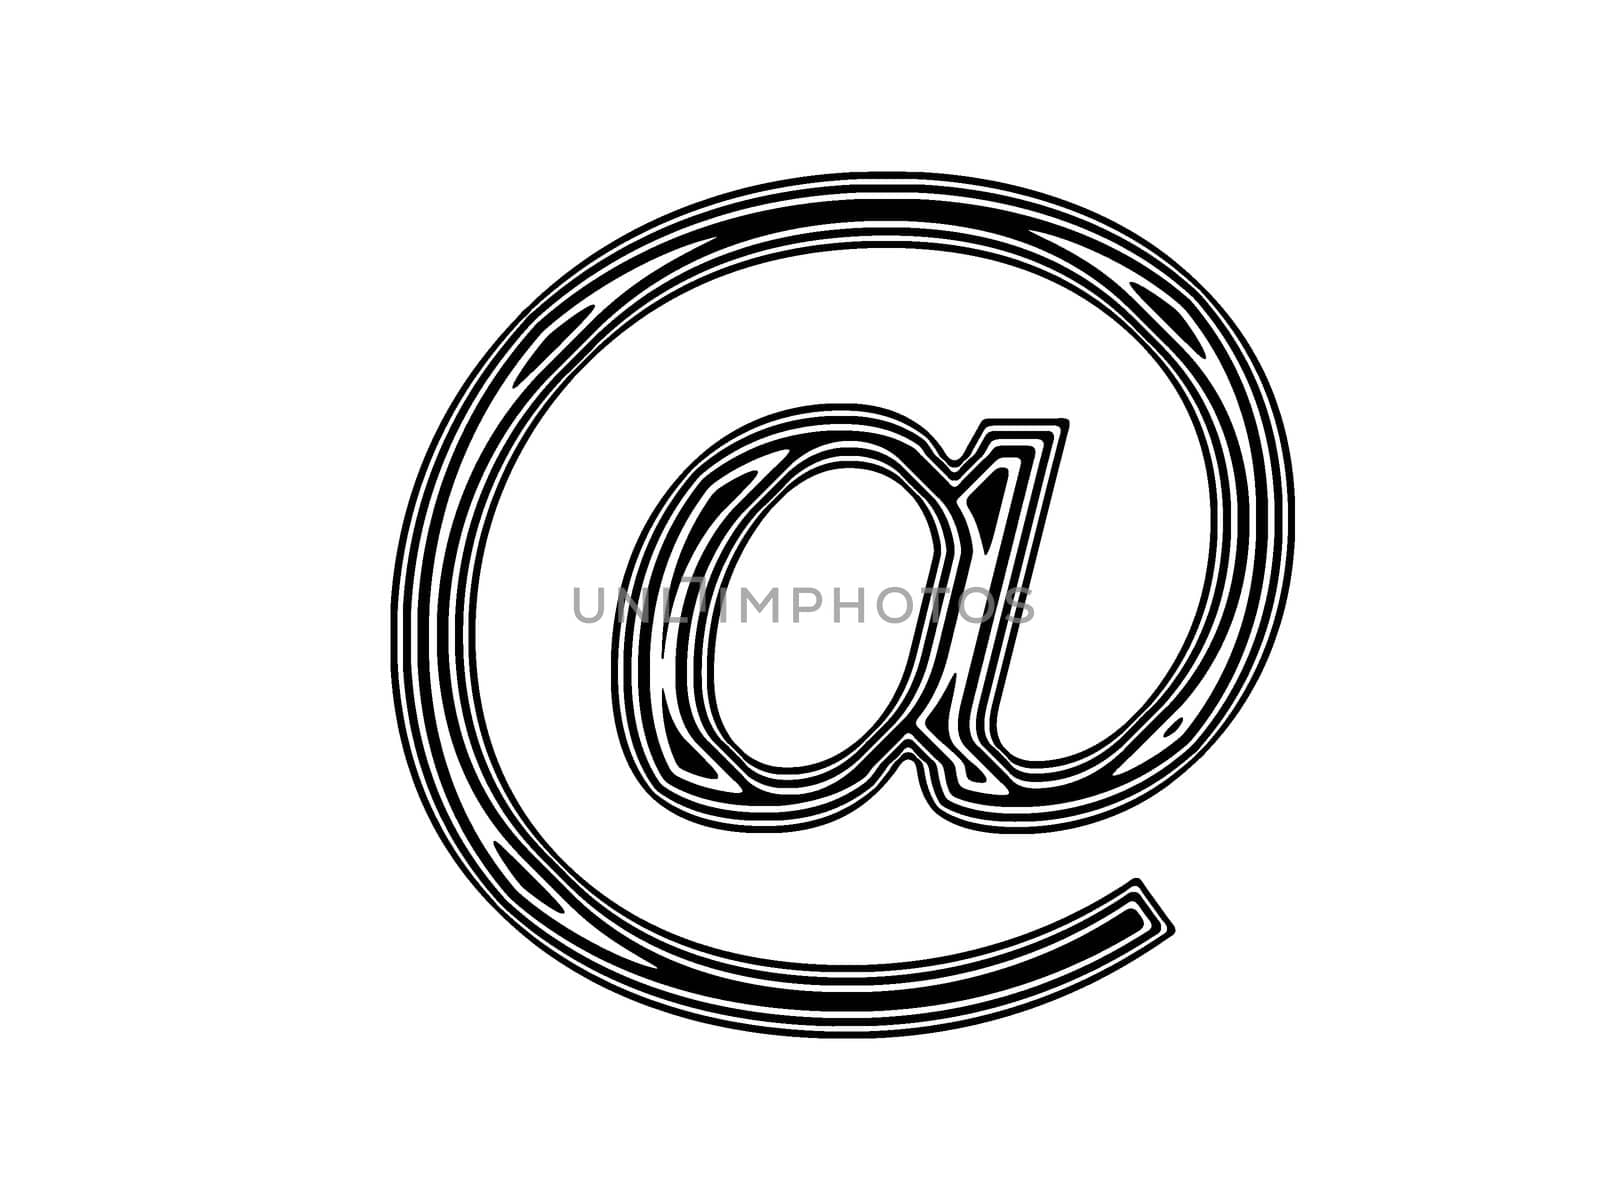 Mail symbol by tomatto